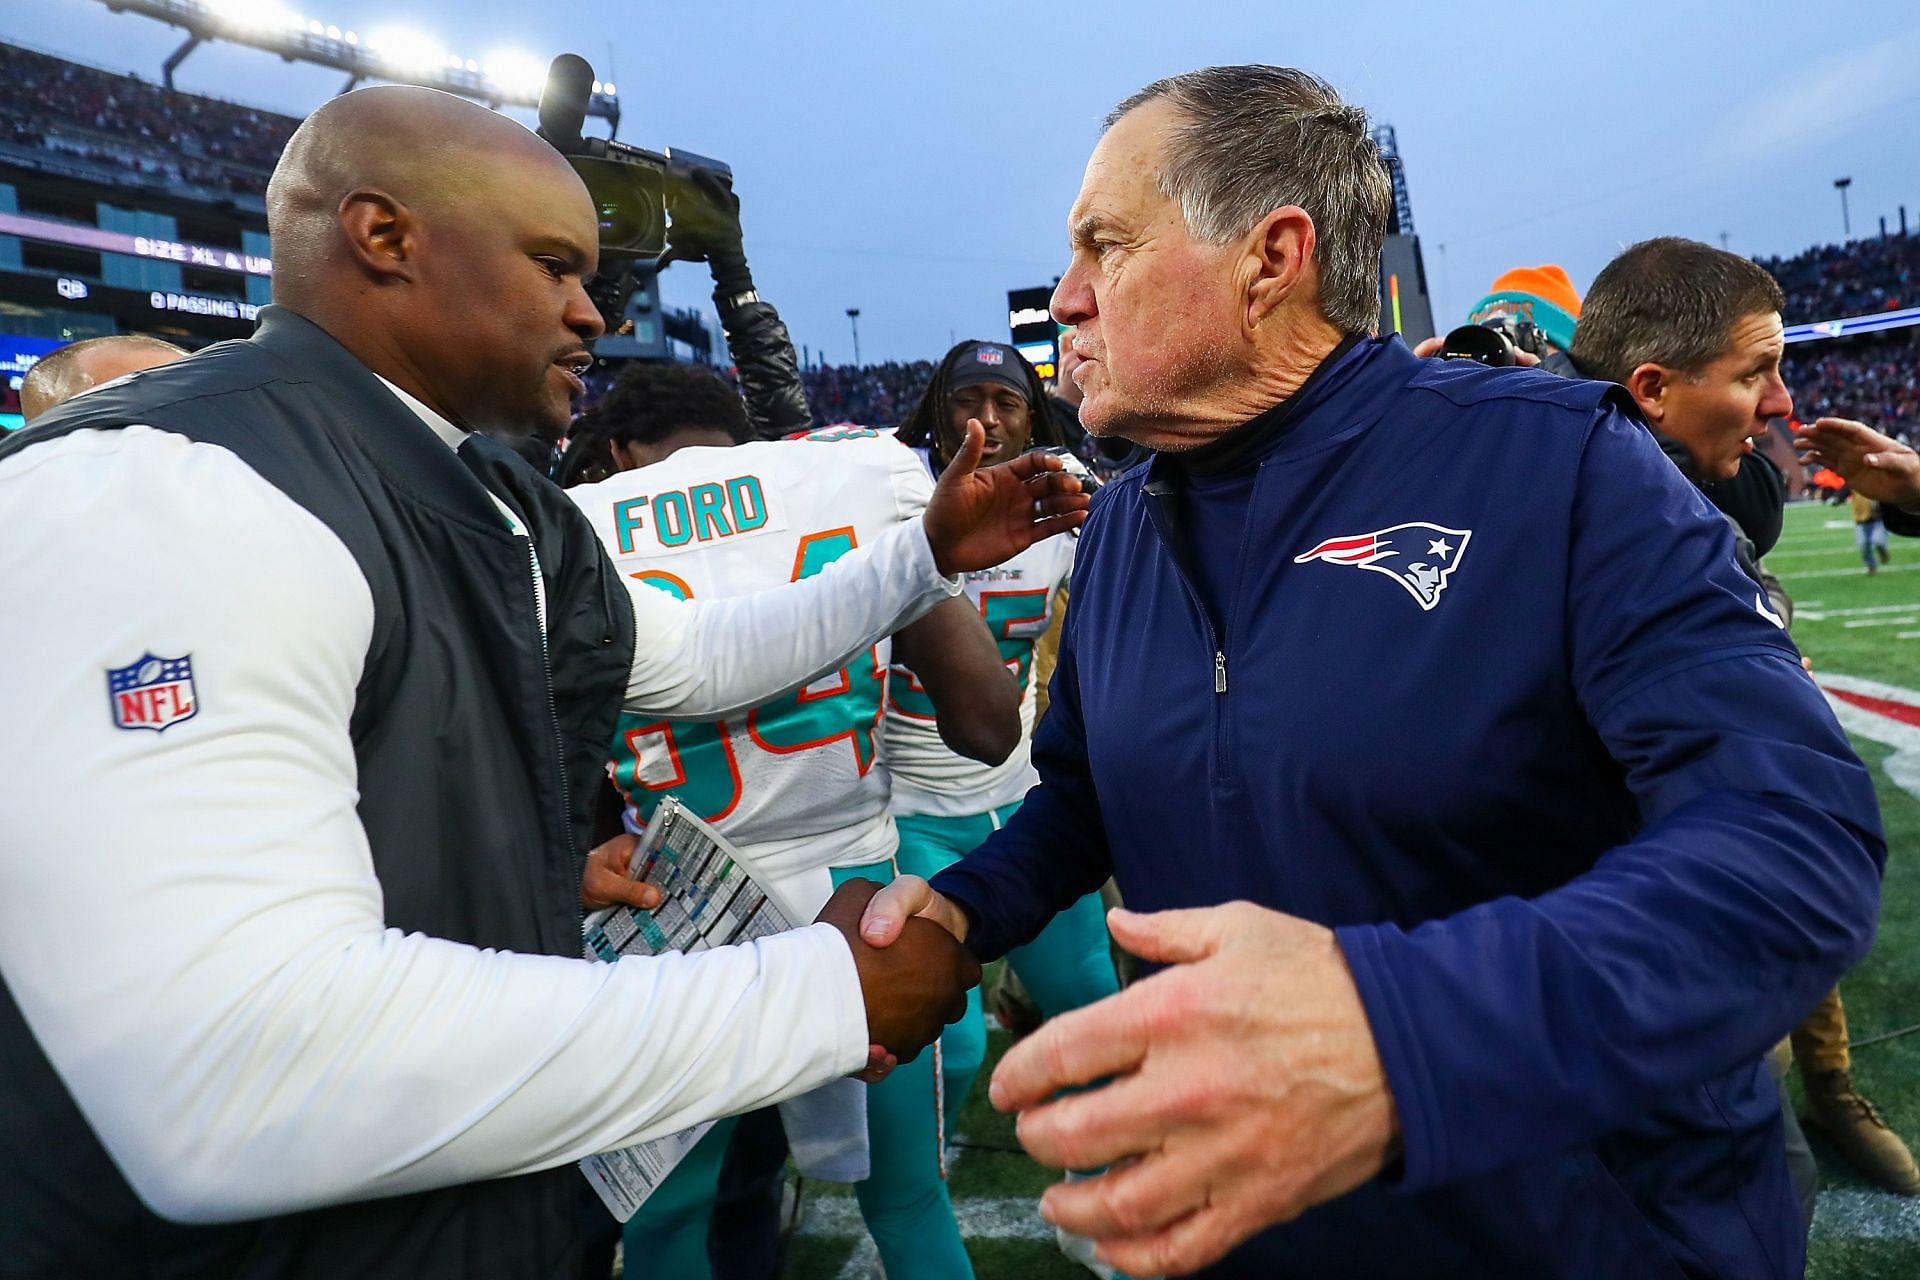 Bill Belichick has somehow become embroiled in the Dolphins tampering scandal